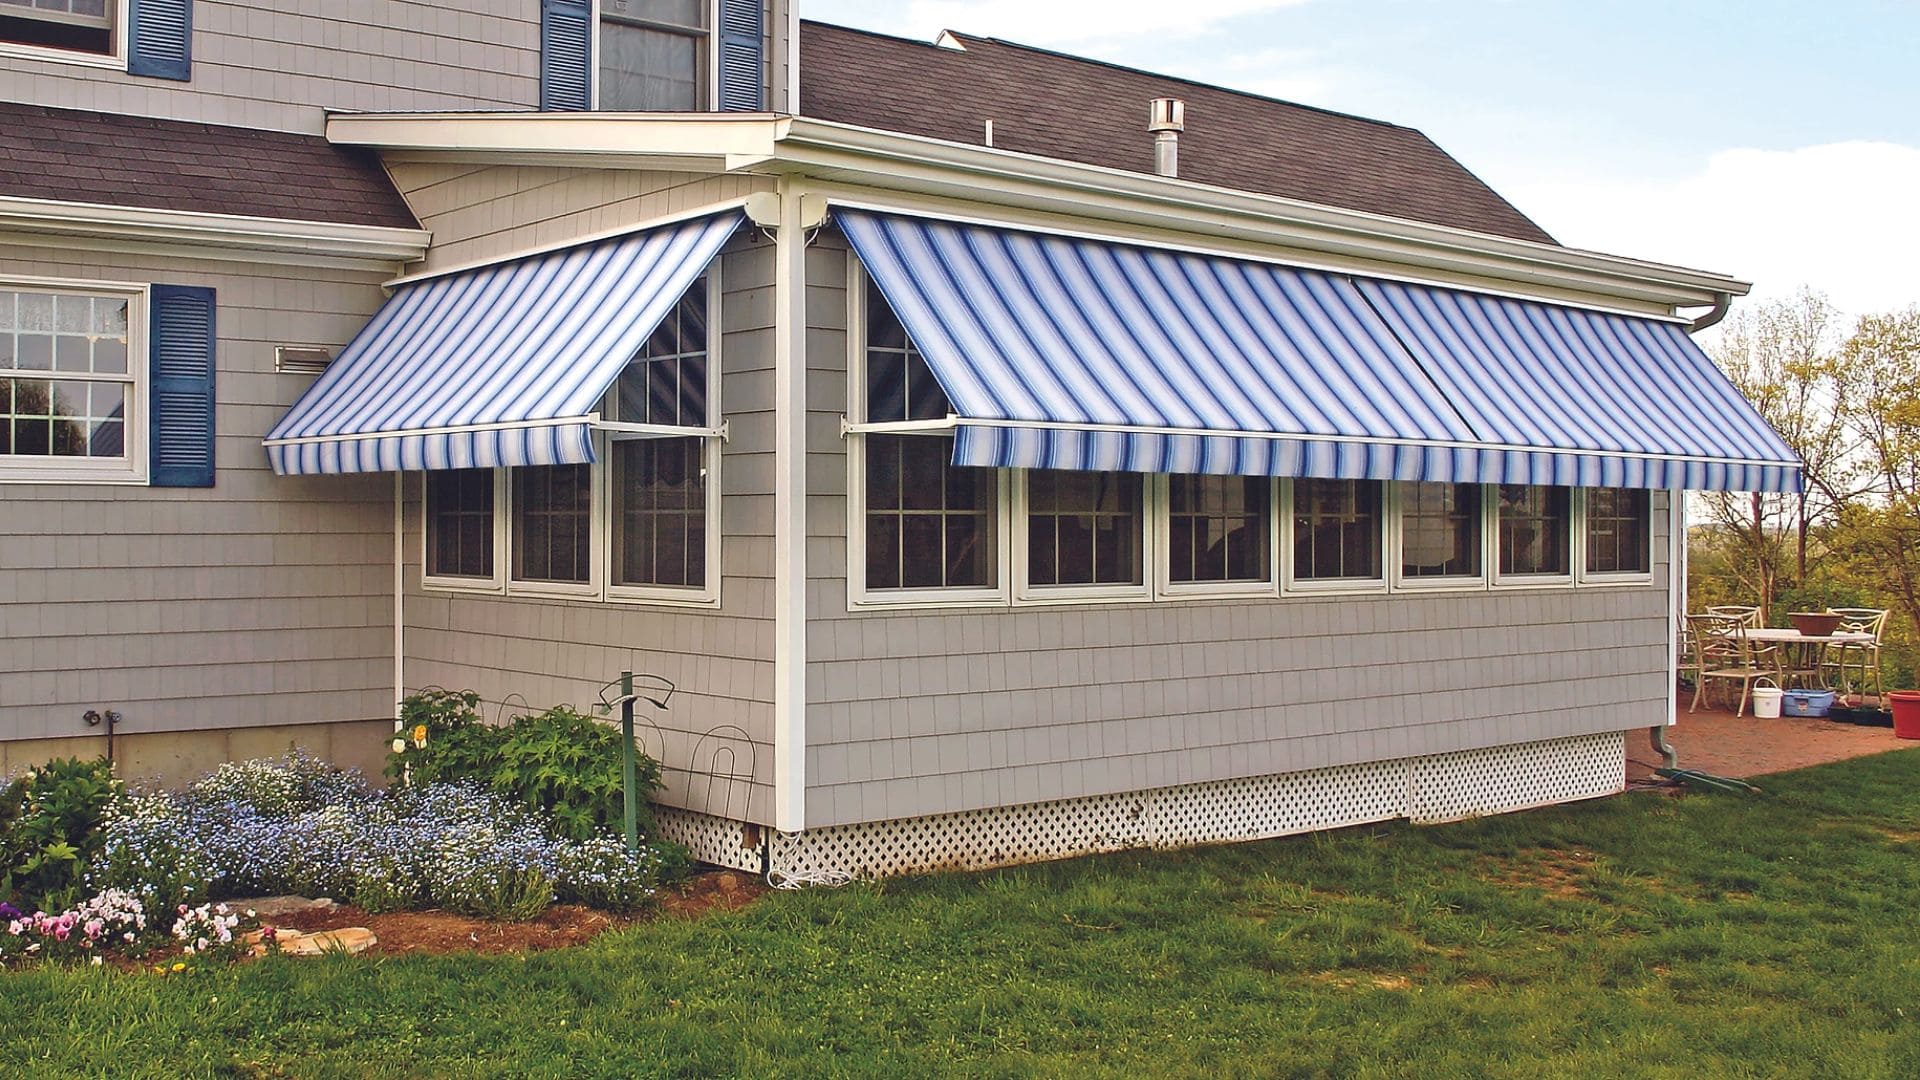 What Are the Different Types of Home Awnings Available?